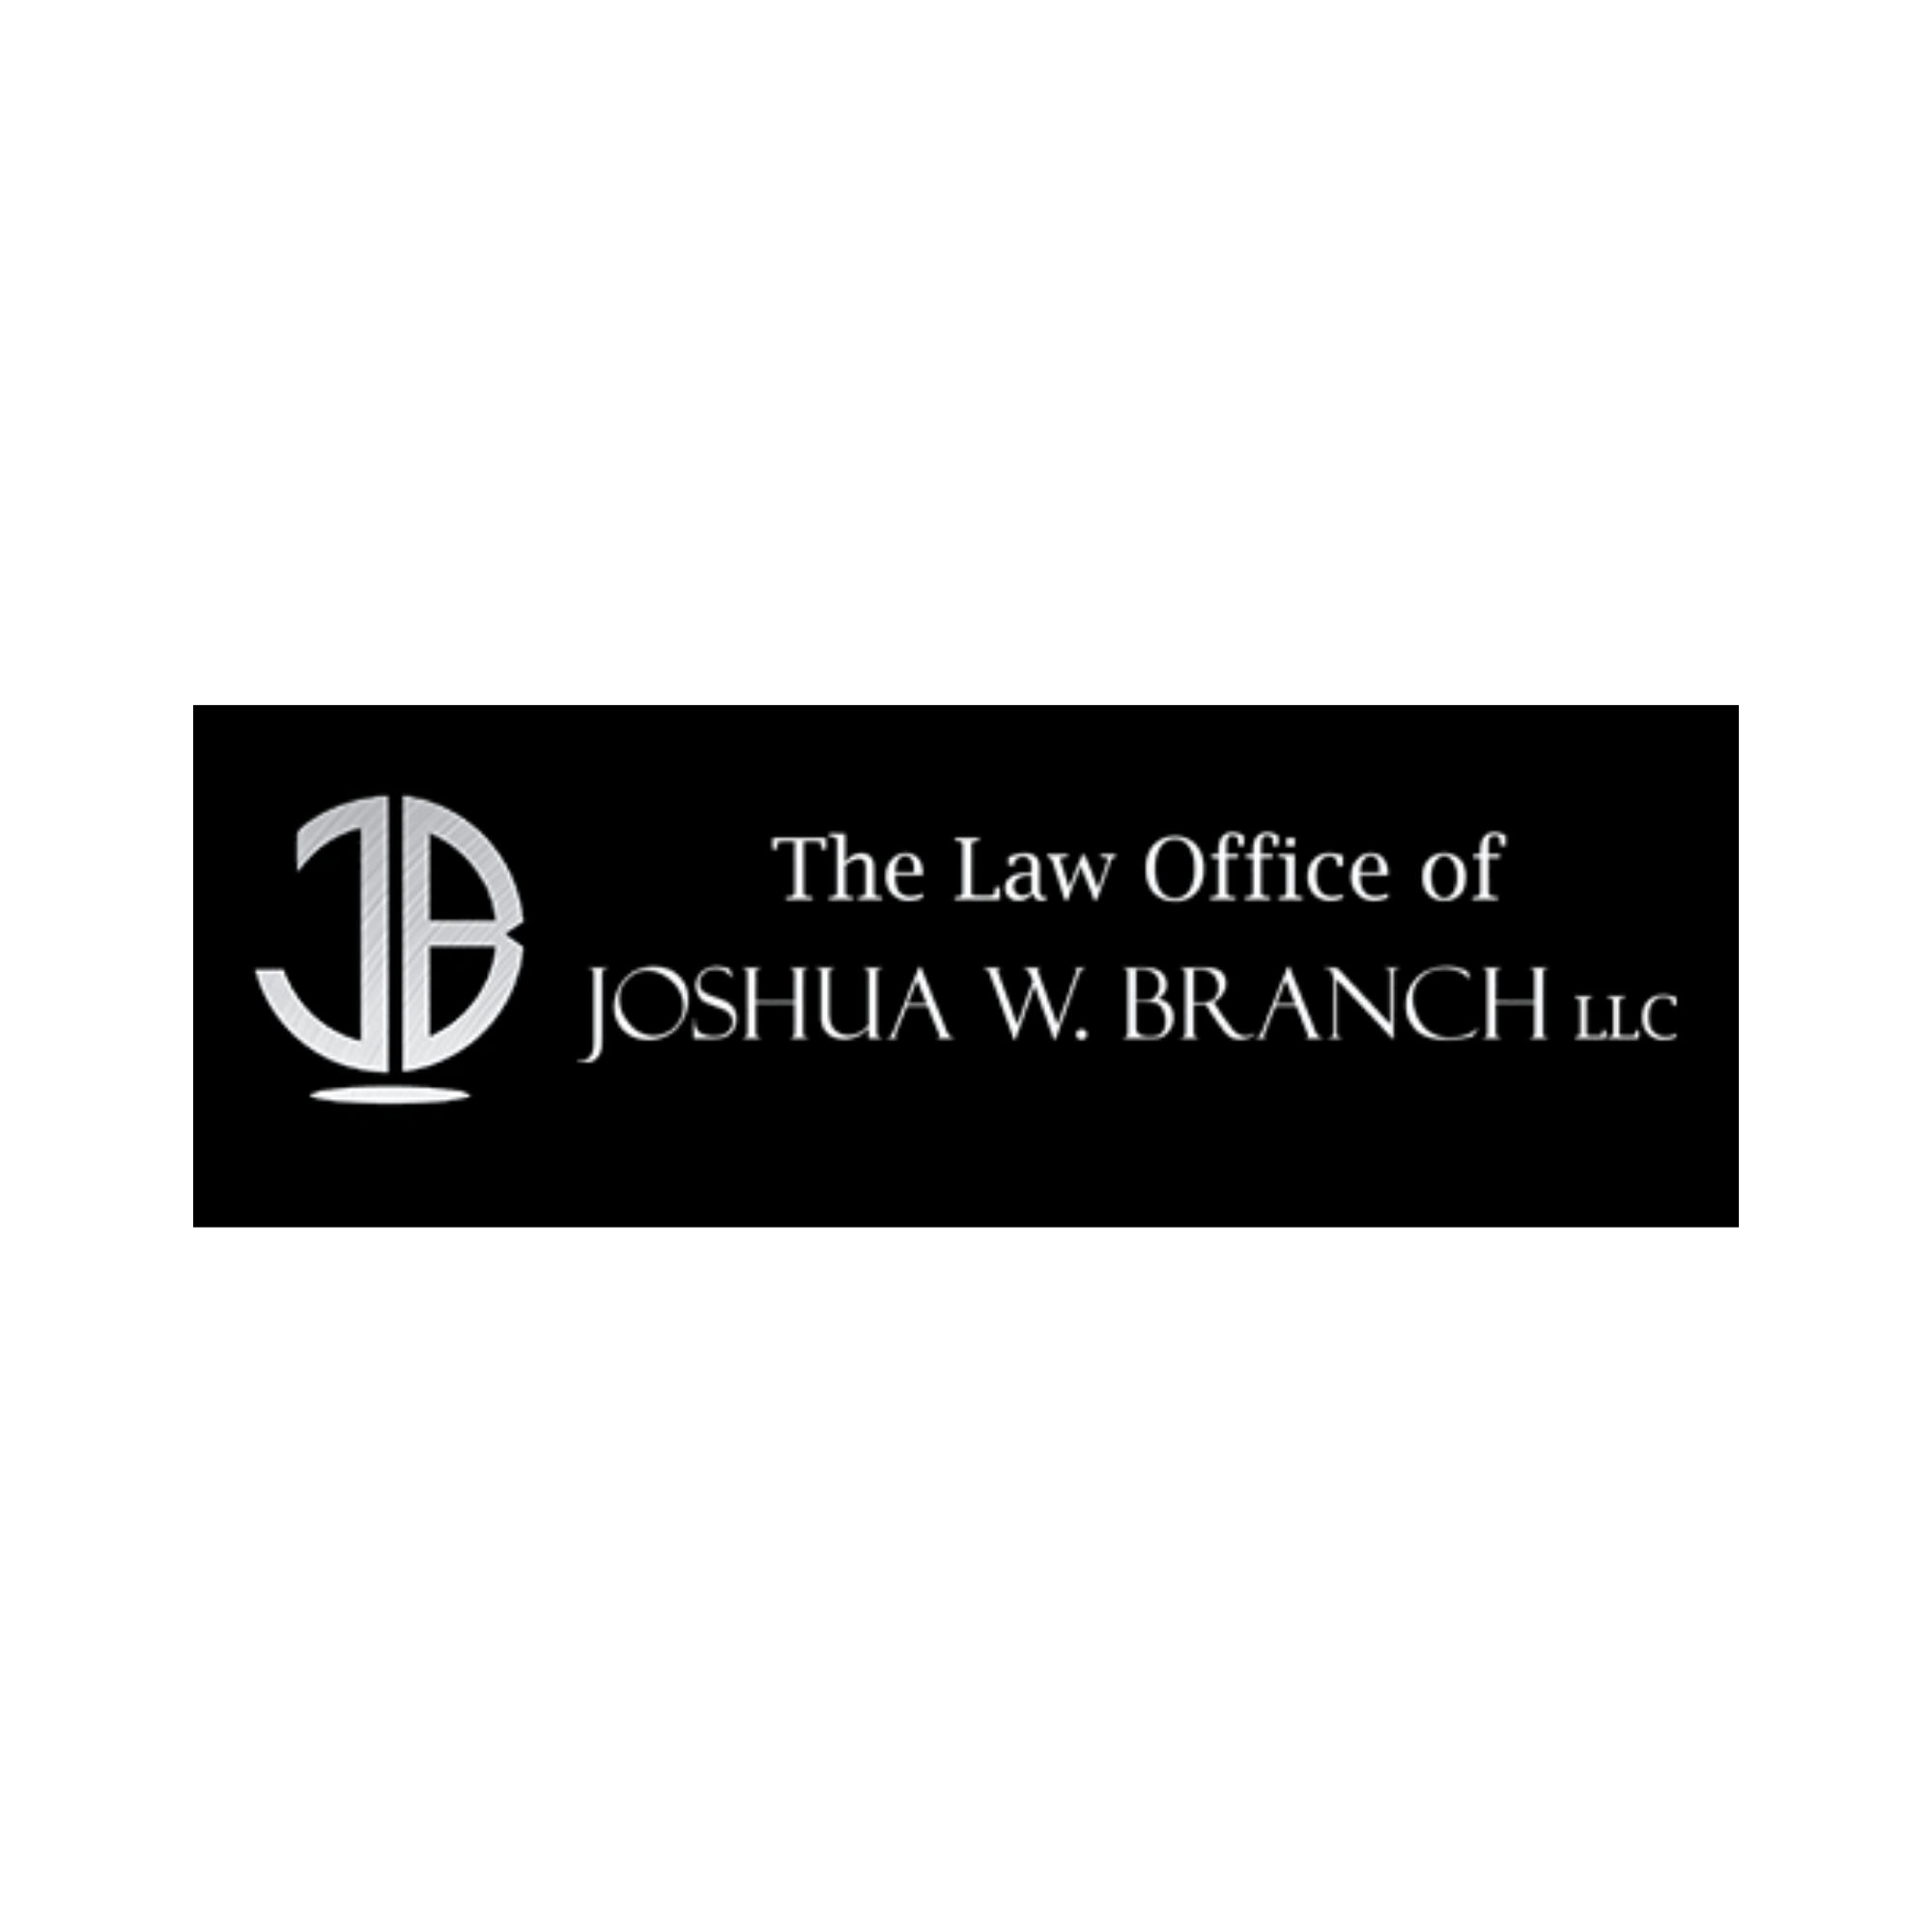 a black and white logo for The Law Office of Joshua Branch